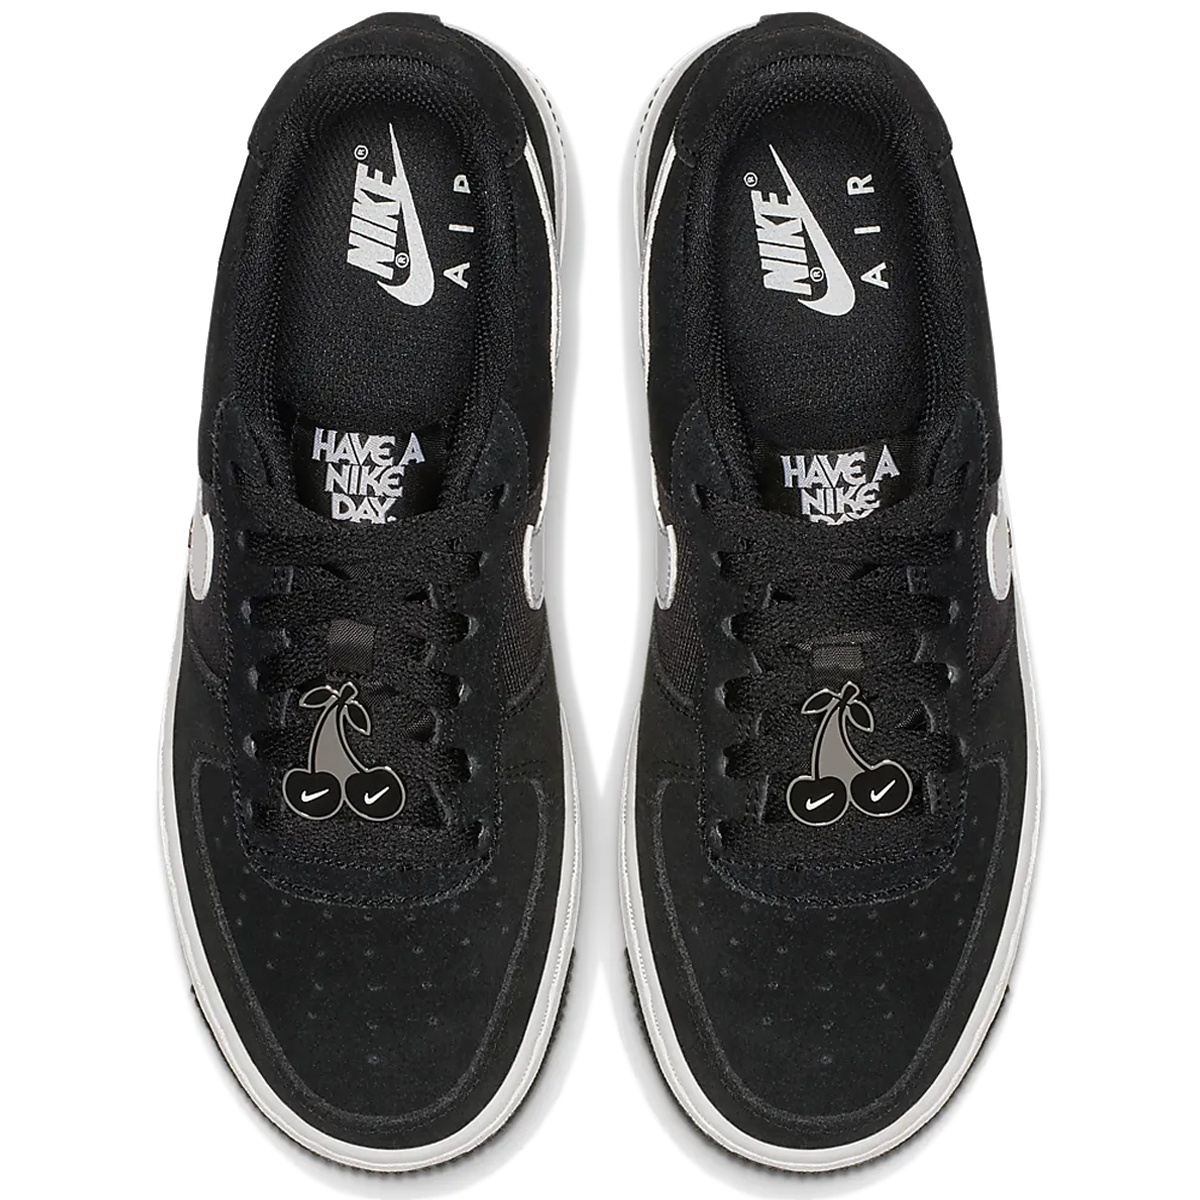 Nike Патики AIR FORCE 1 LV8 NK DAY(GS) 